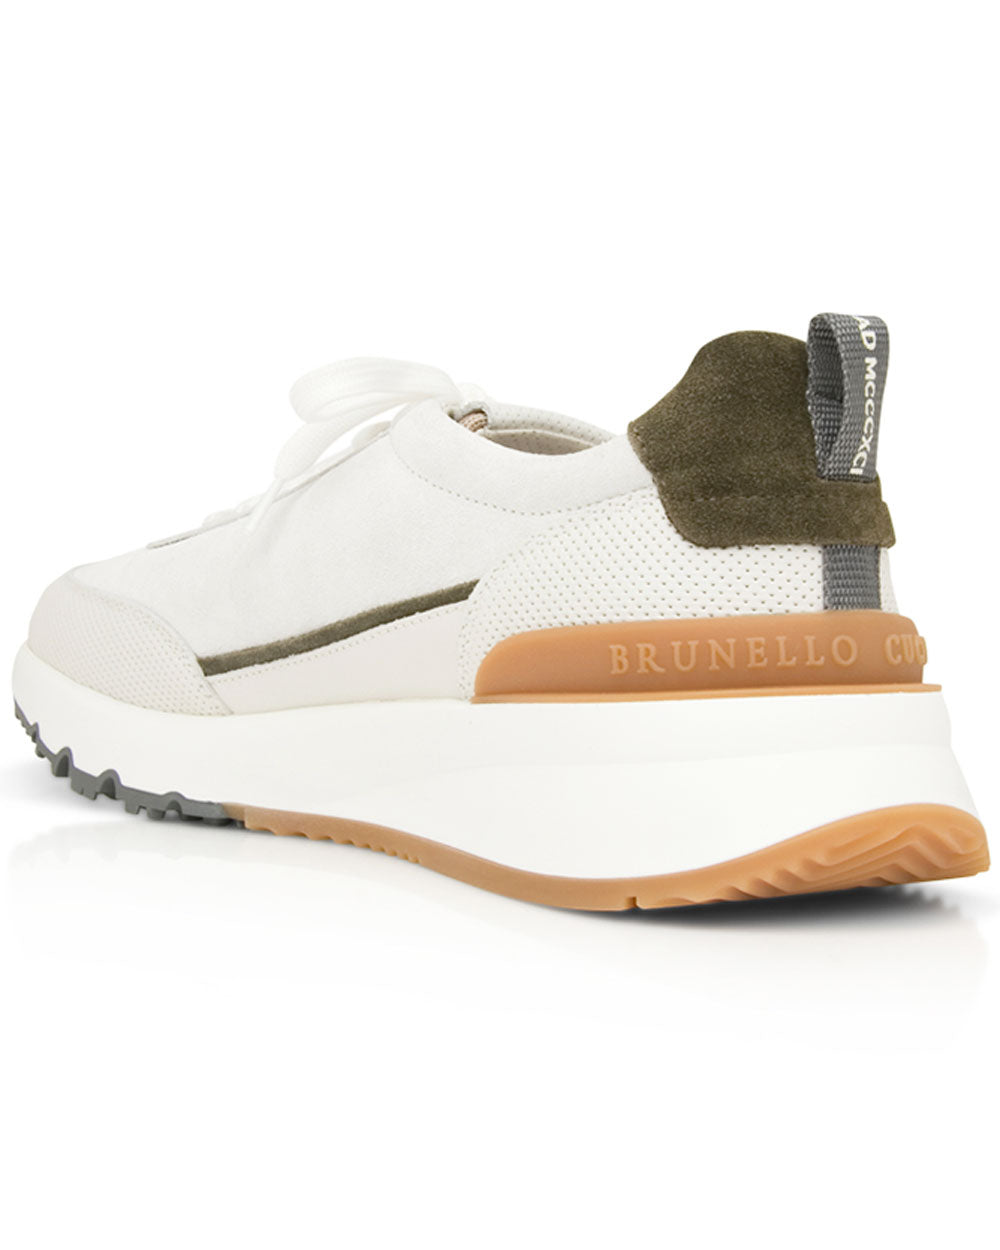 Suede Paneled Sneaker in White